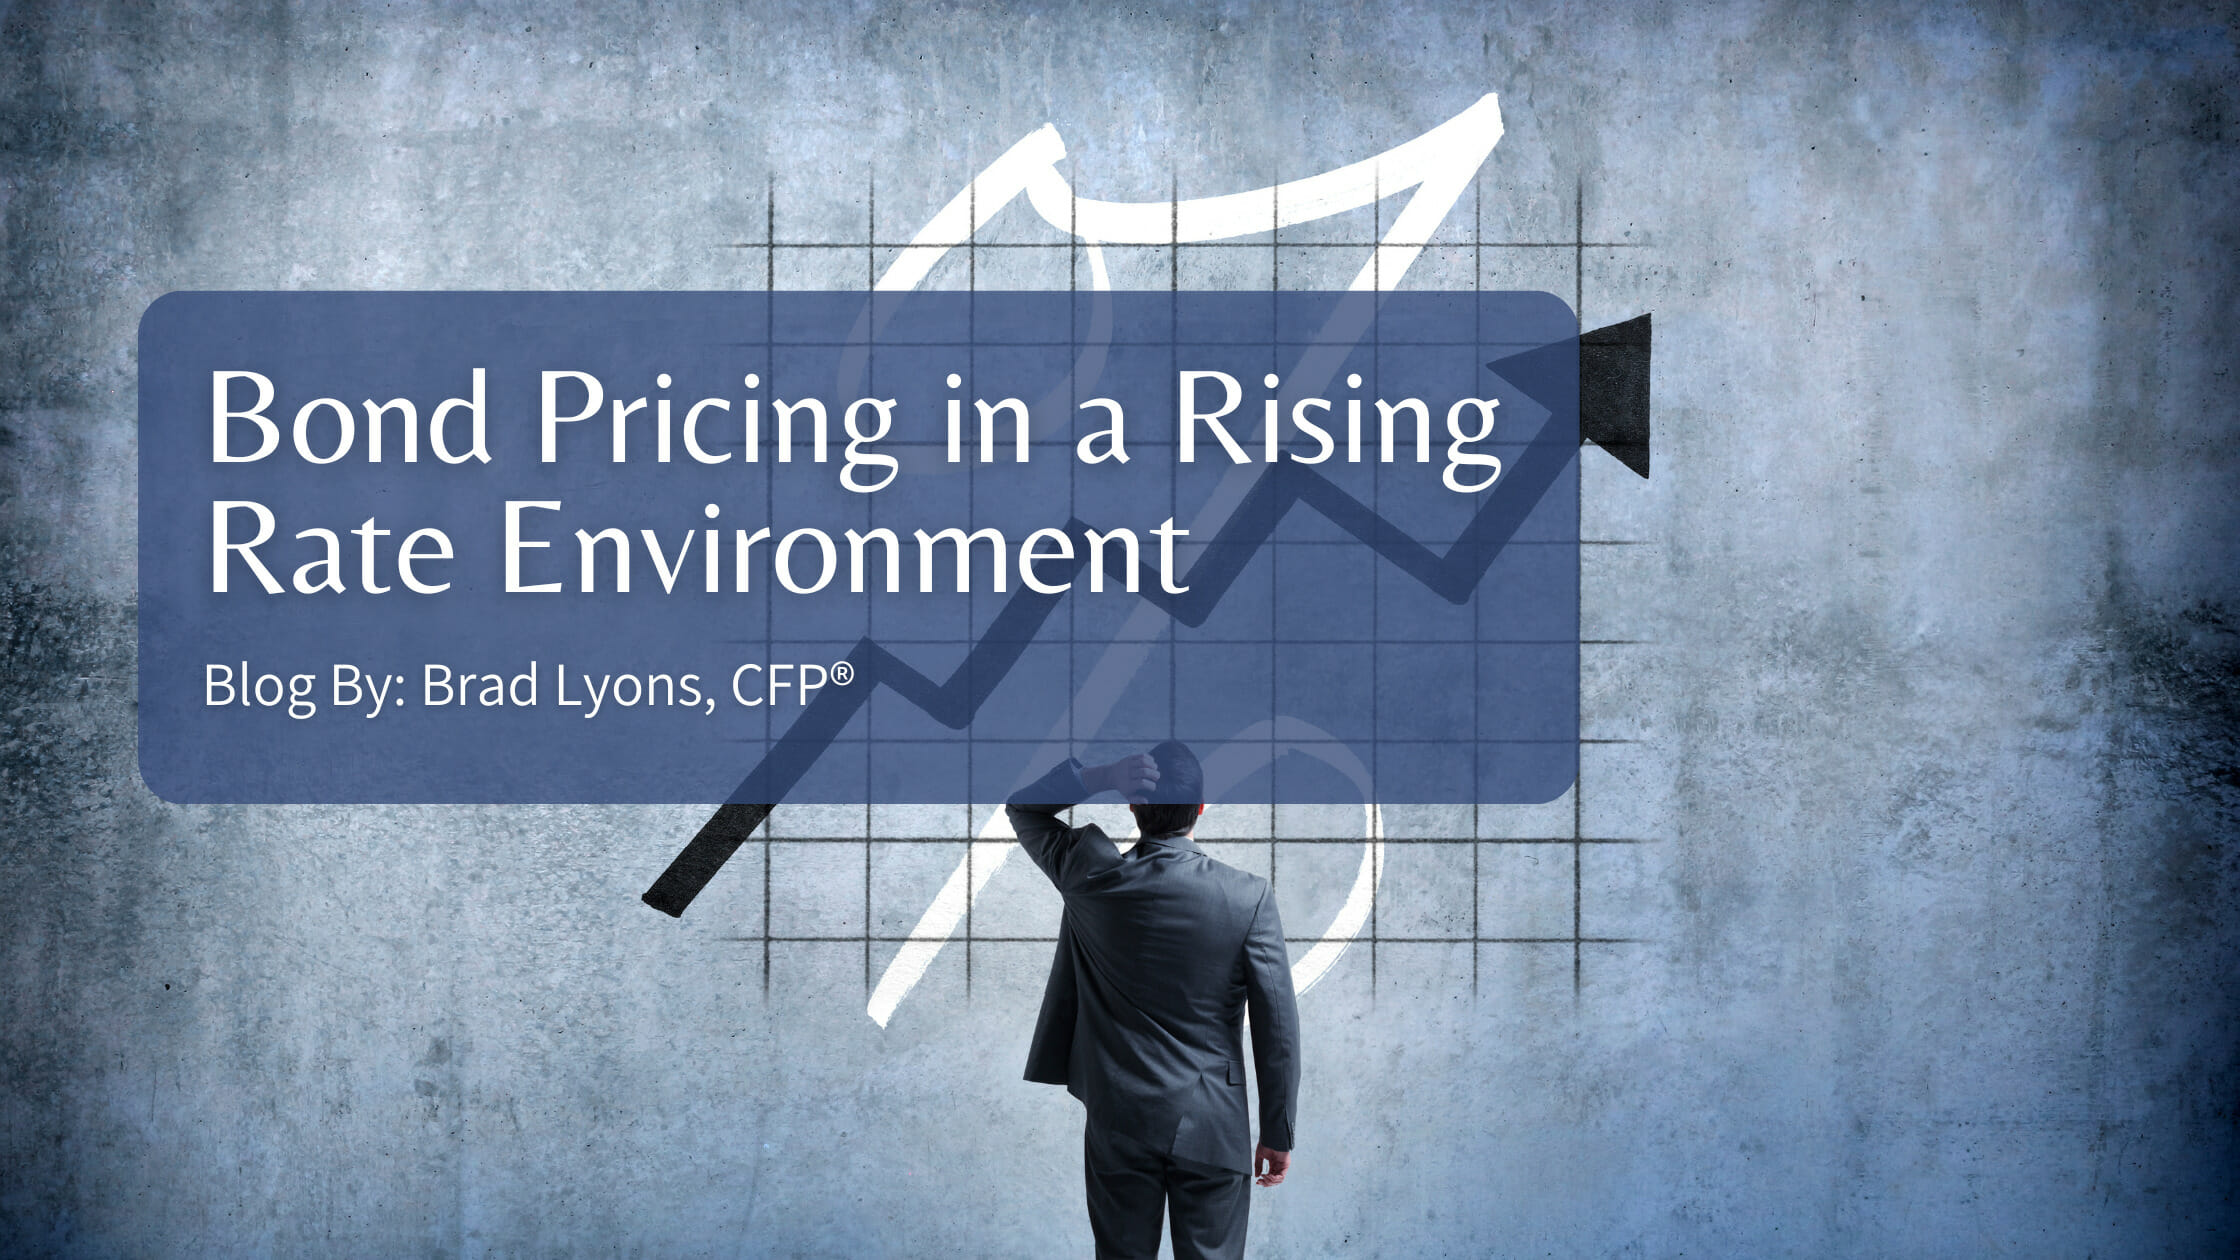 Bond Pricing in a Rising Rate Environment